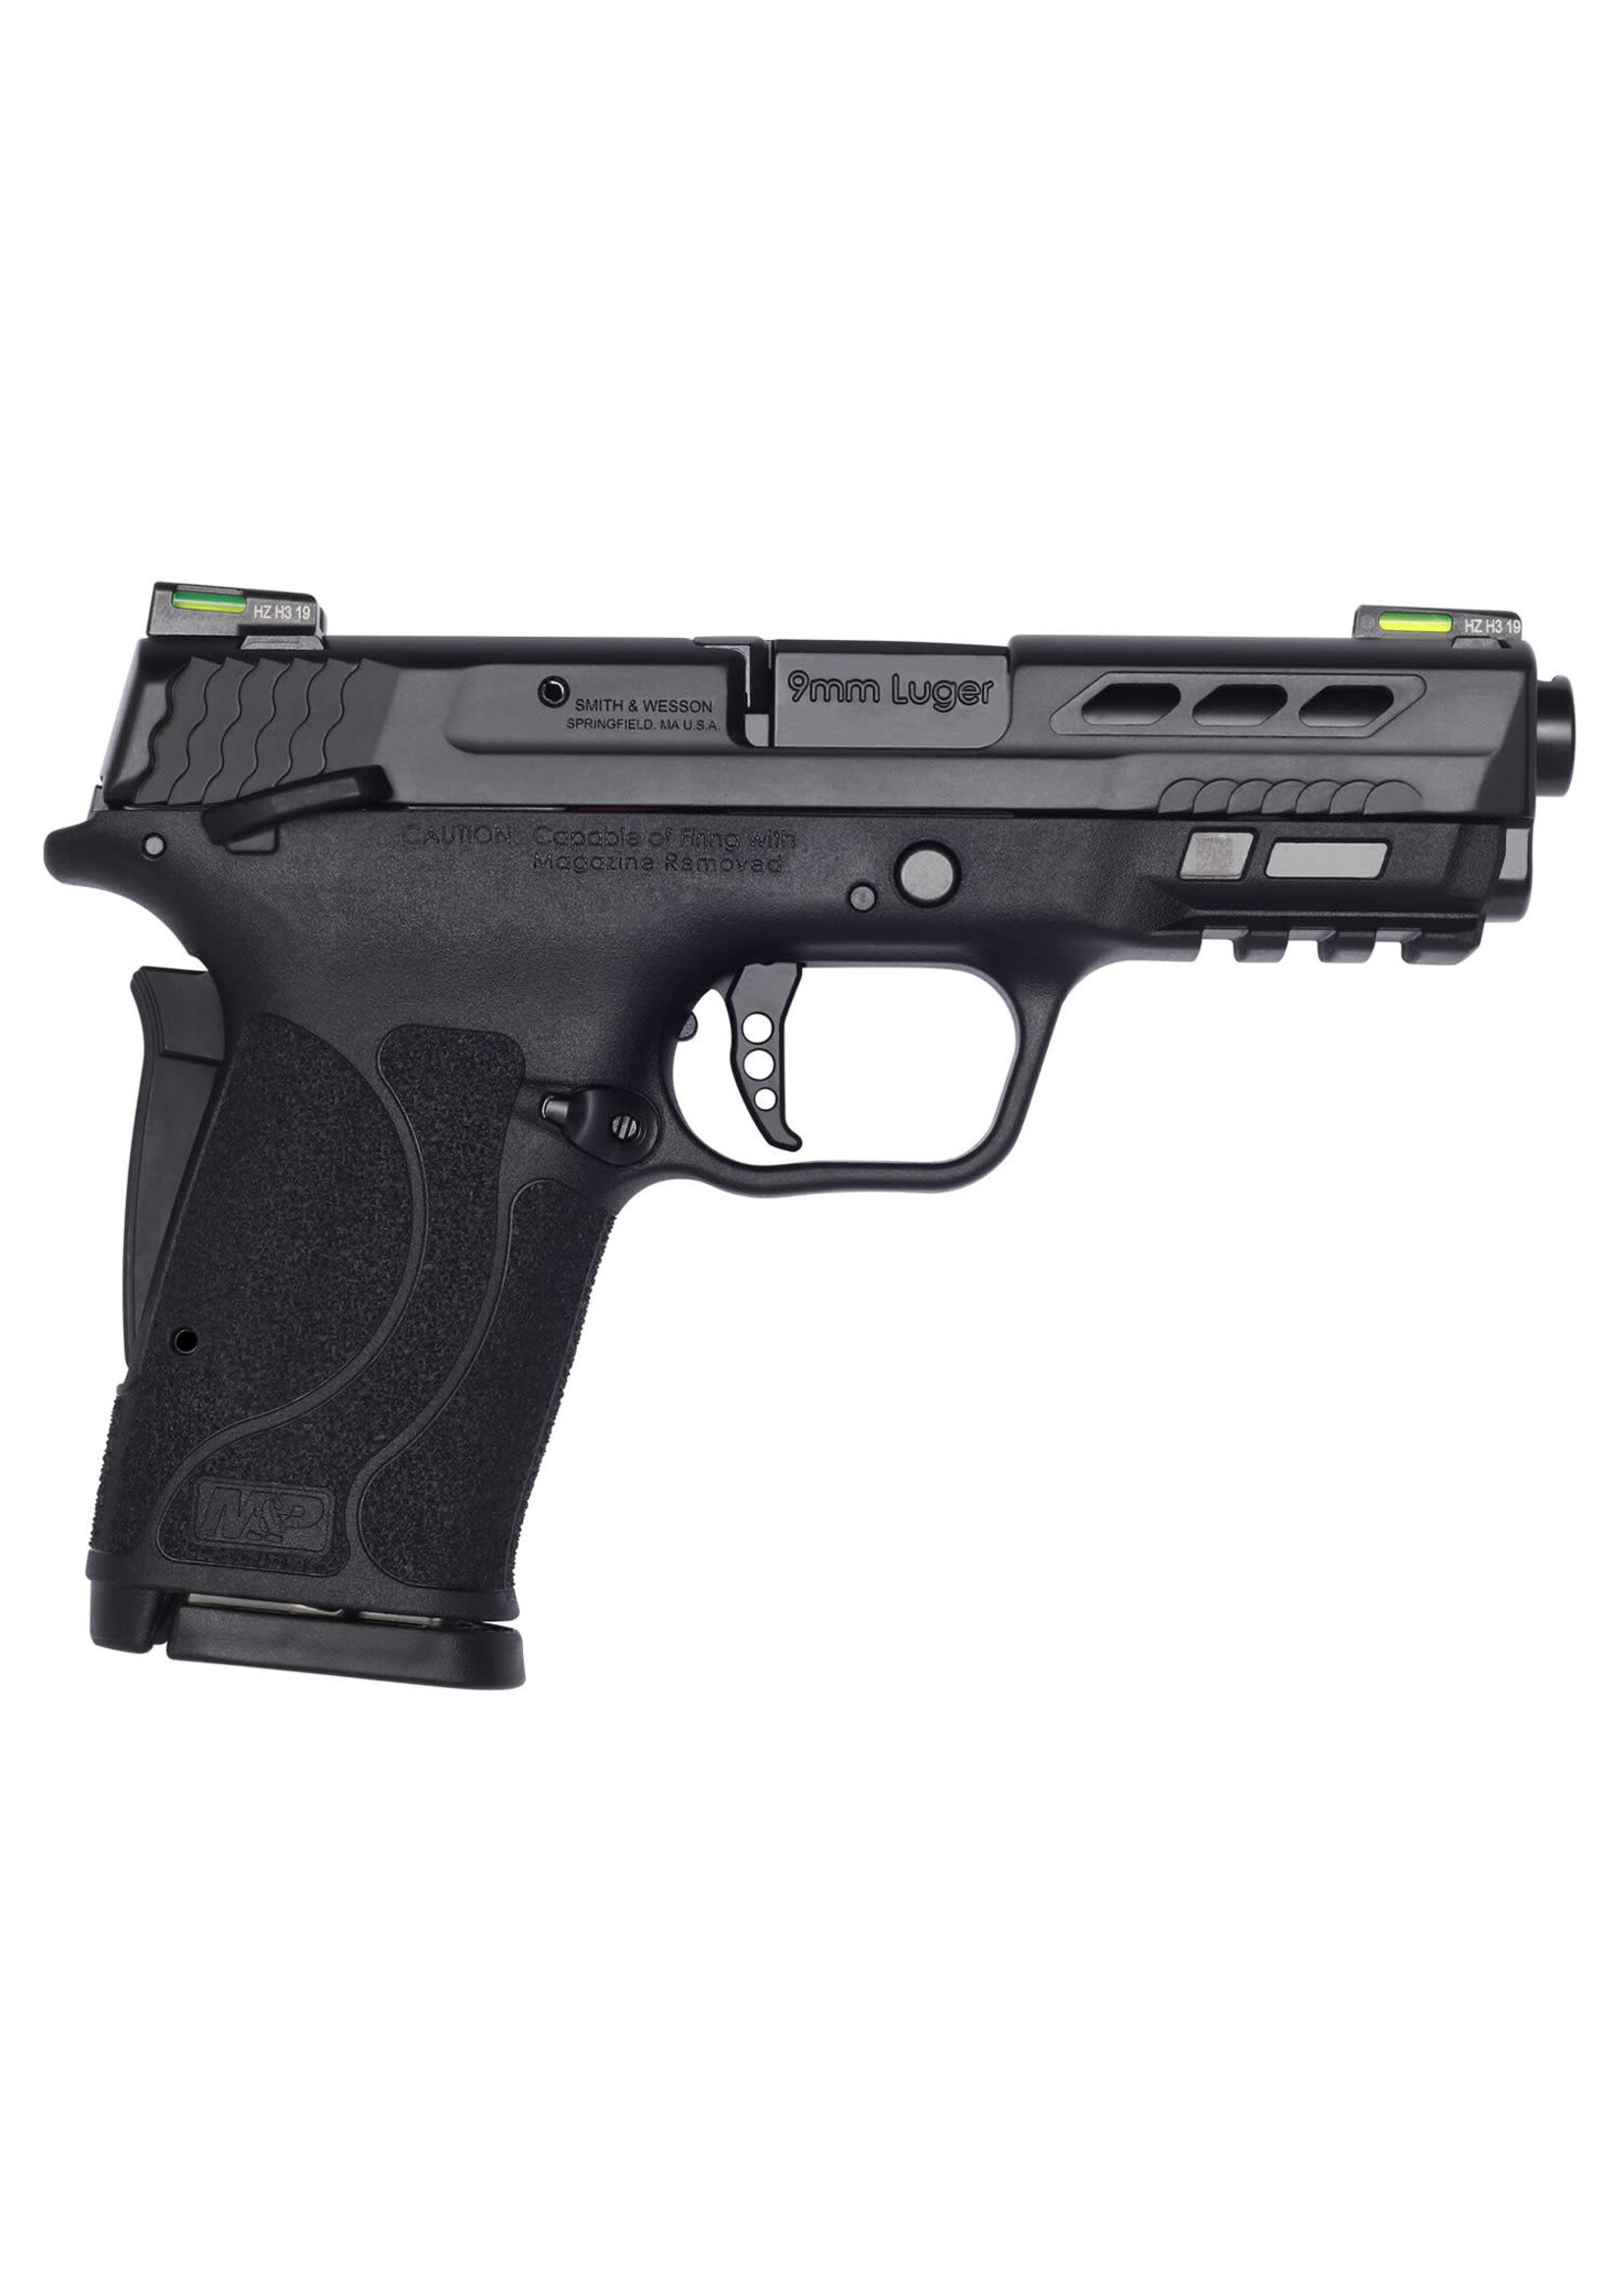 Smith and Wesson (S&W) Smith & Wesson 13223 M&P Performance Center Shield EZ M2.0 9mm Luger 3.80" Ported Barrel 8+1, Black Polymer Frame With Picatinny Acc. Rail, Lightening Cut Armornite Slide, HiViz Litewave H3 Sights, Manual Safety